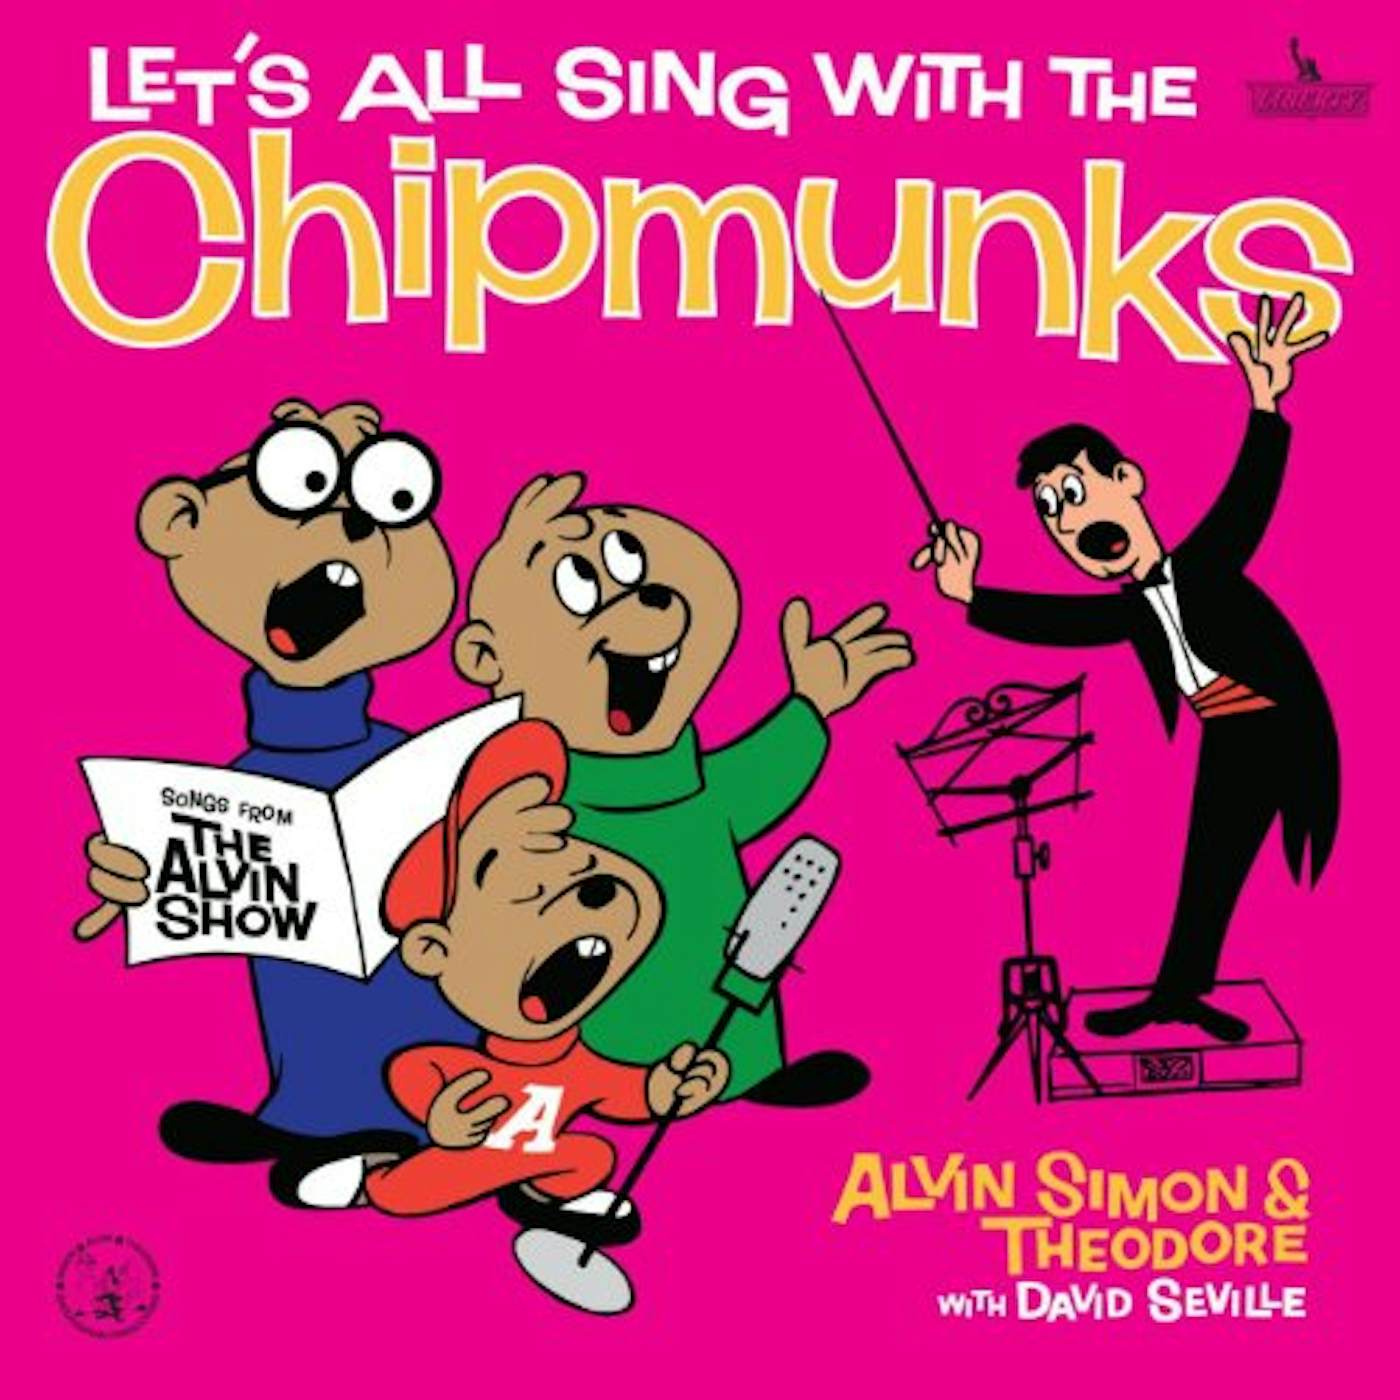 Alvin and the Chipmunks LET'S ALL SING CD